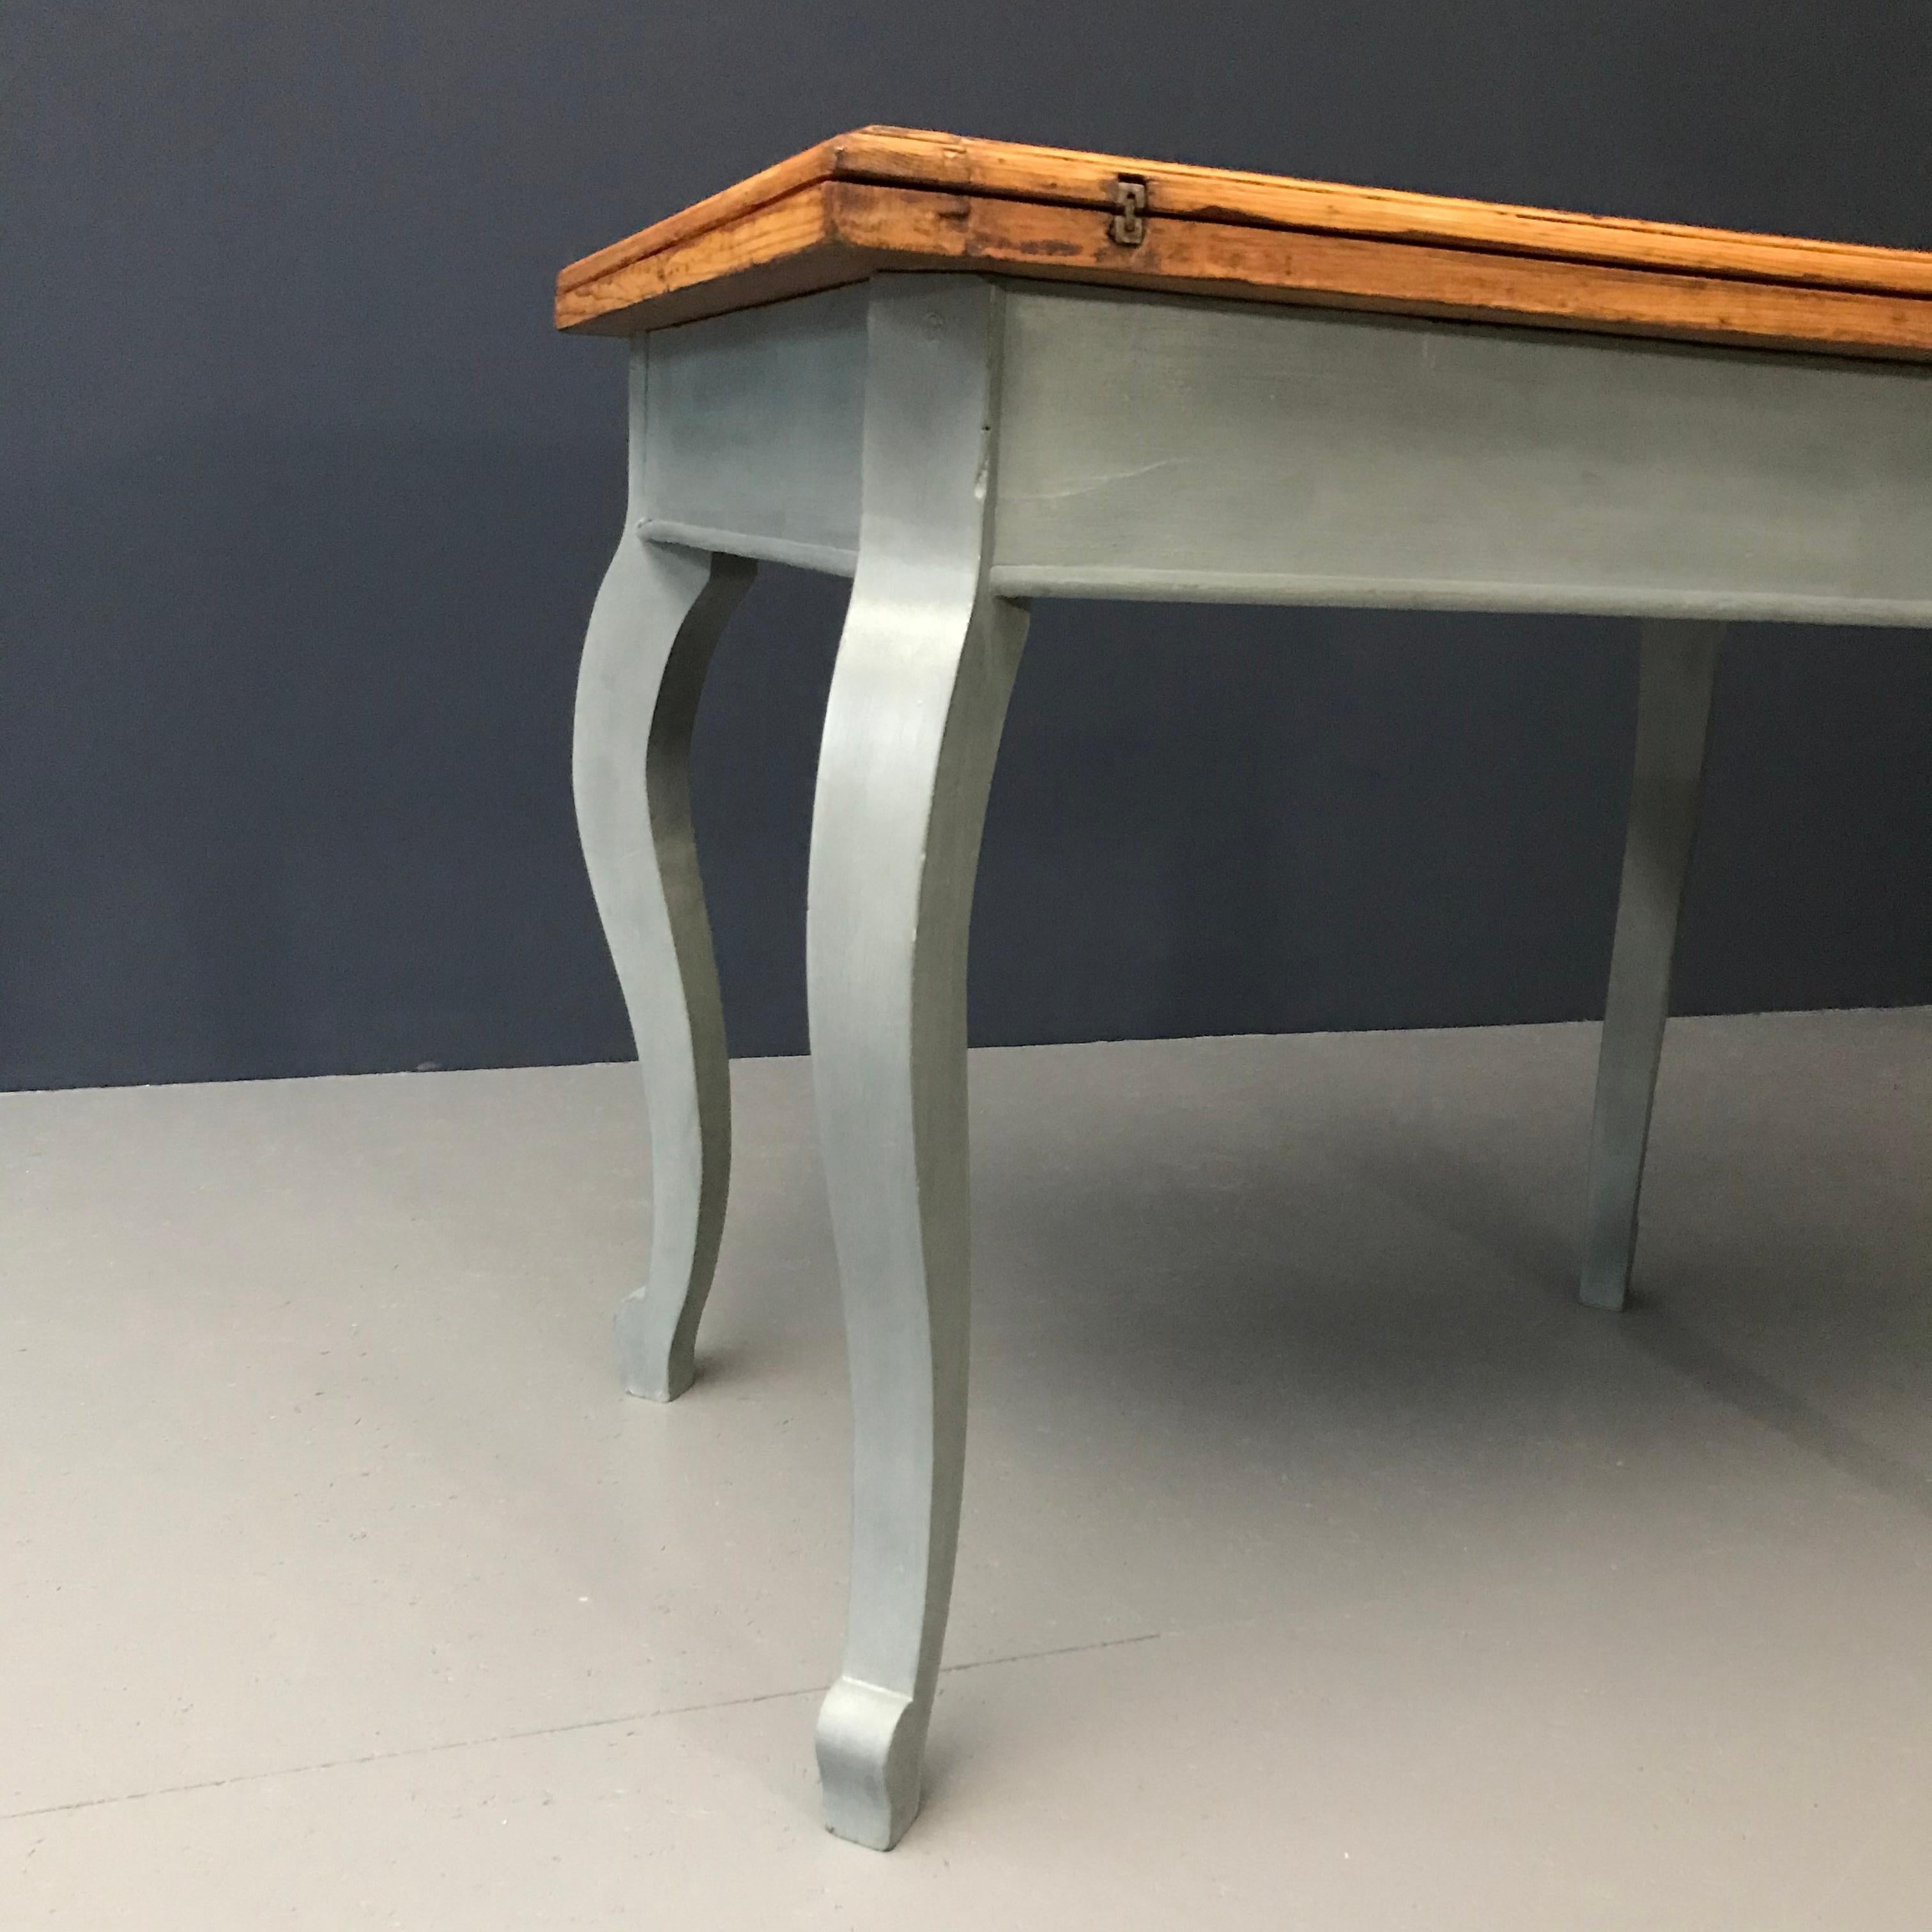 19th Century Italian Provincial Farm Table, Extendable with Storage